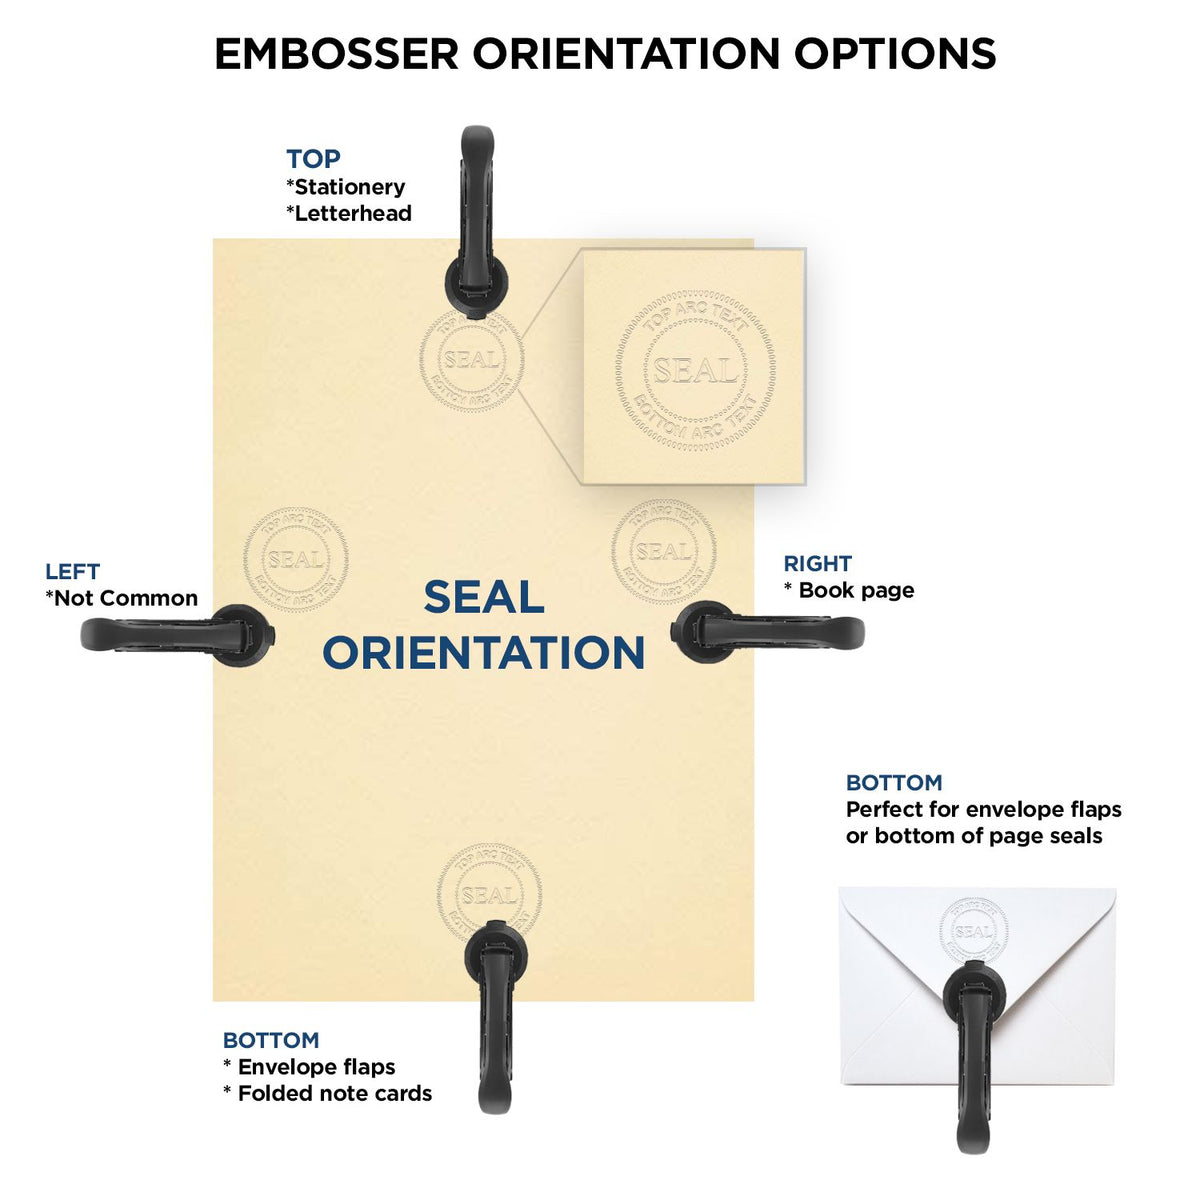 An infographic for the Long Reach Massachusetts PE Seal showing embosser orientation, this is showing examples of a top, bottom, right and left insert.